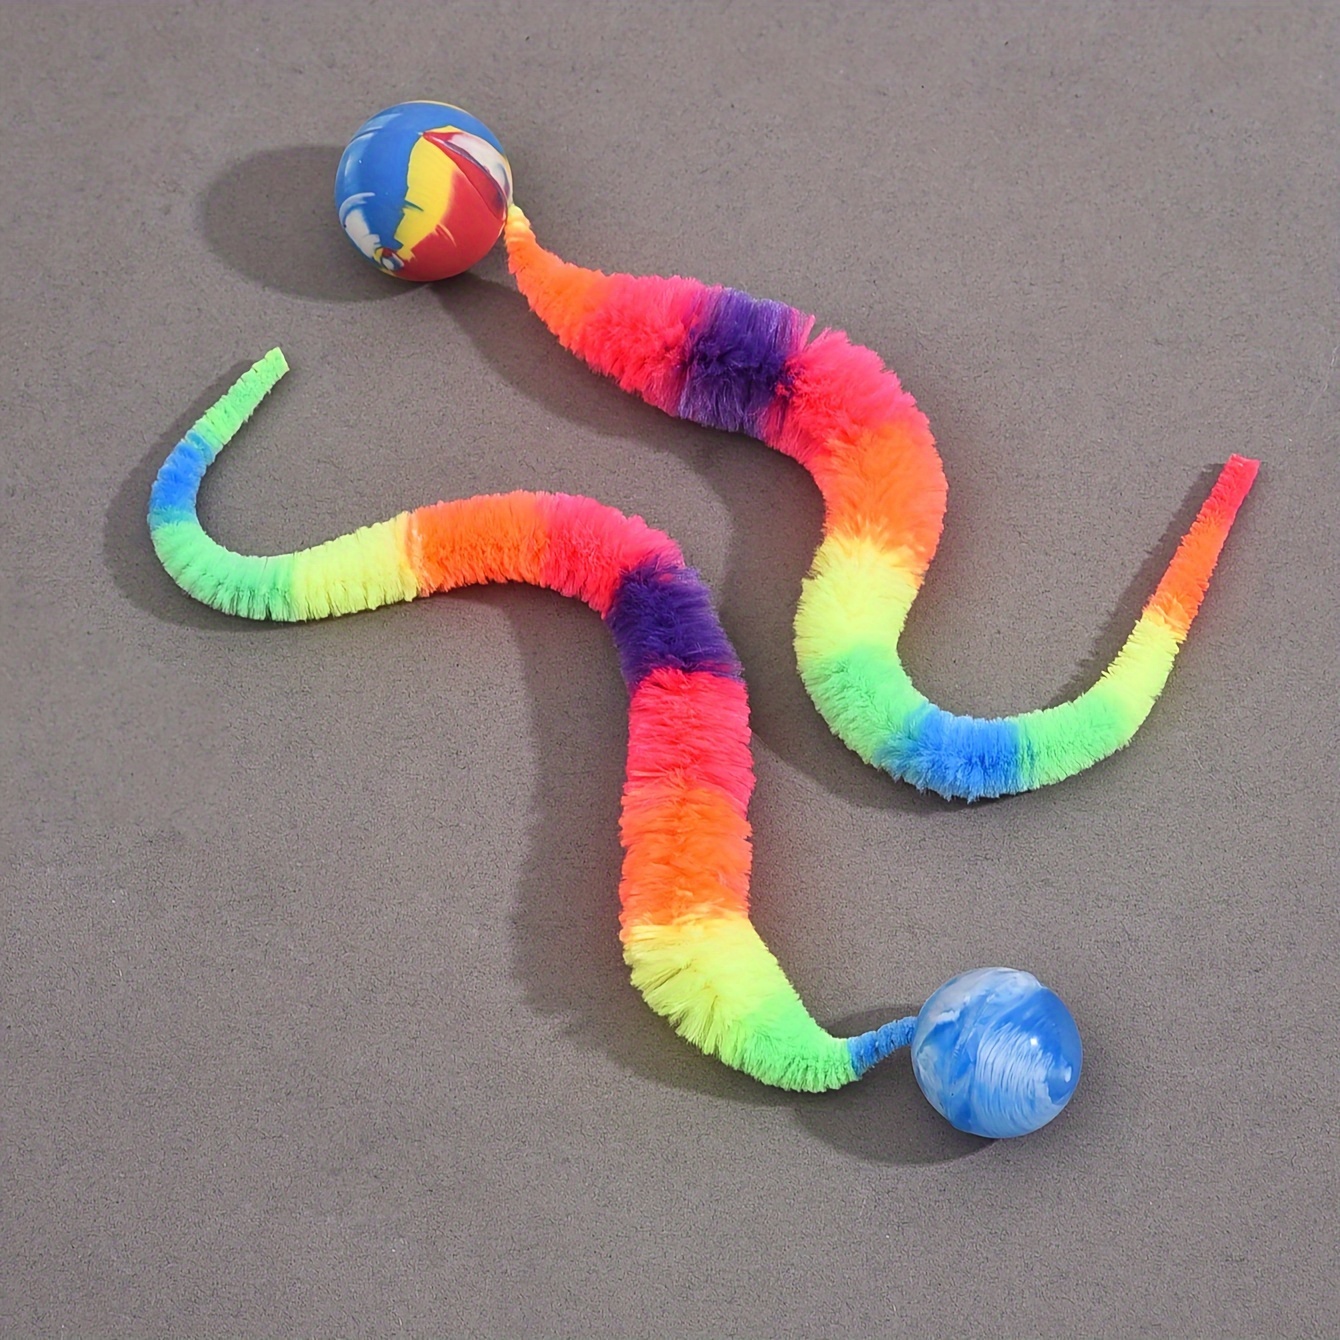 

2 Pcs Interactive Cat Teaser Toys - Geometric Polyester Twisty Worms With Attached Balls, Uncharged Sticks For Kittens - Colorful Simulation Caterpillar Set Without Batteries